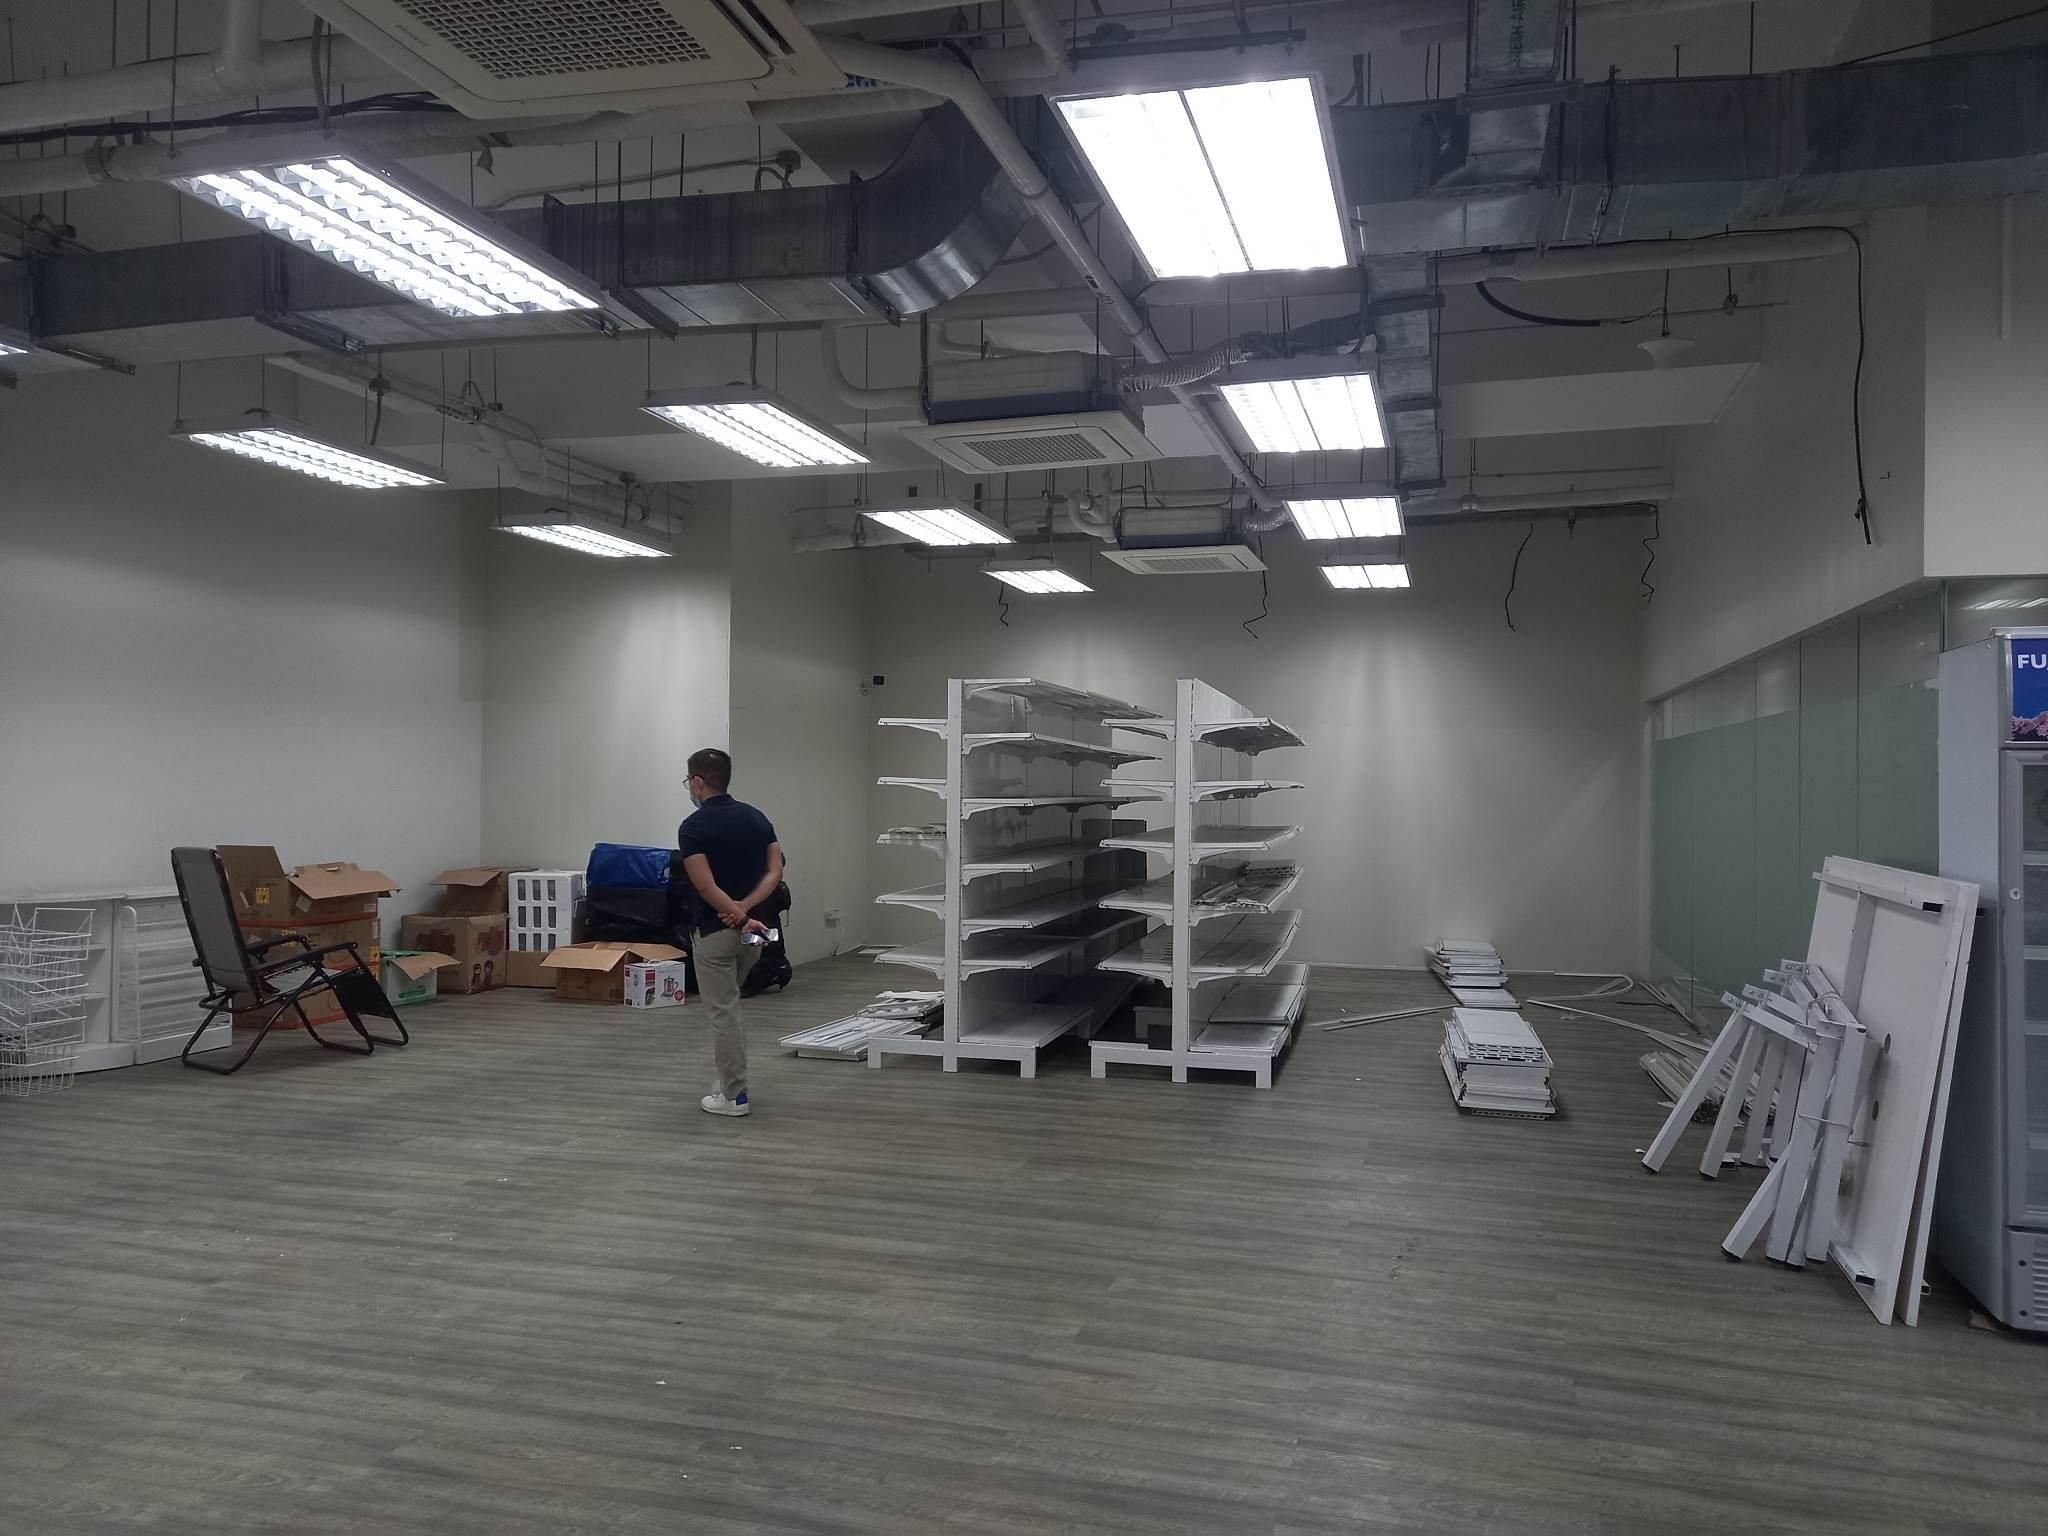 BPO Office Space Rent Lease Furnished 1613 sqm Mandaluyong City